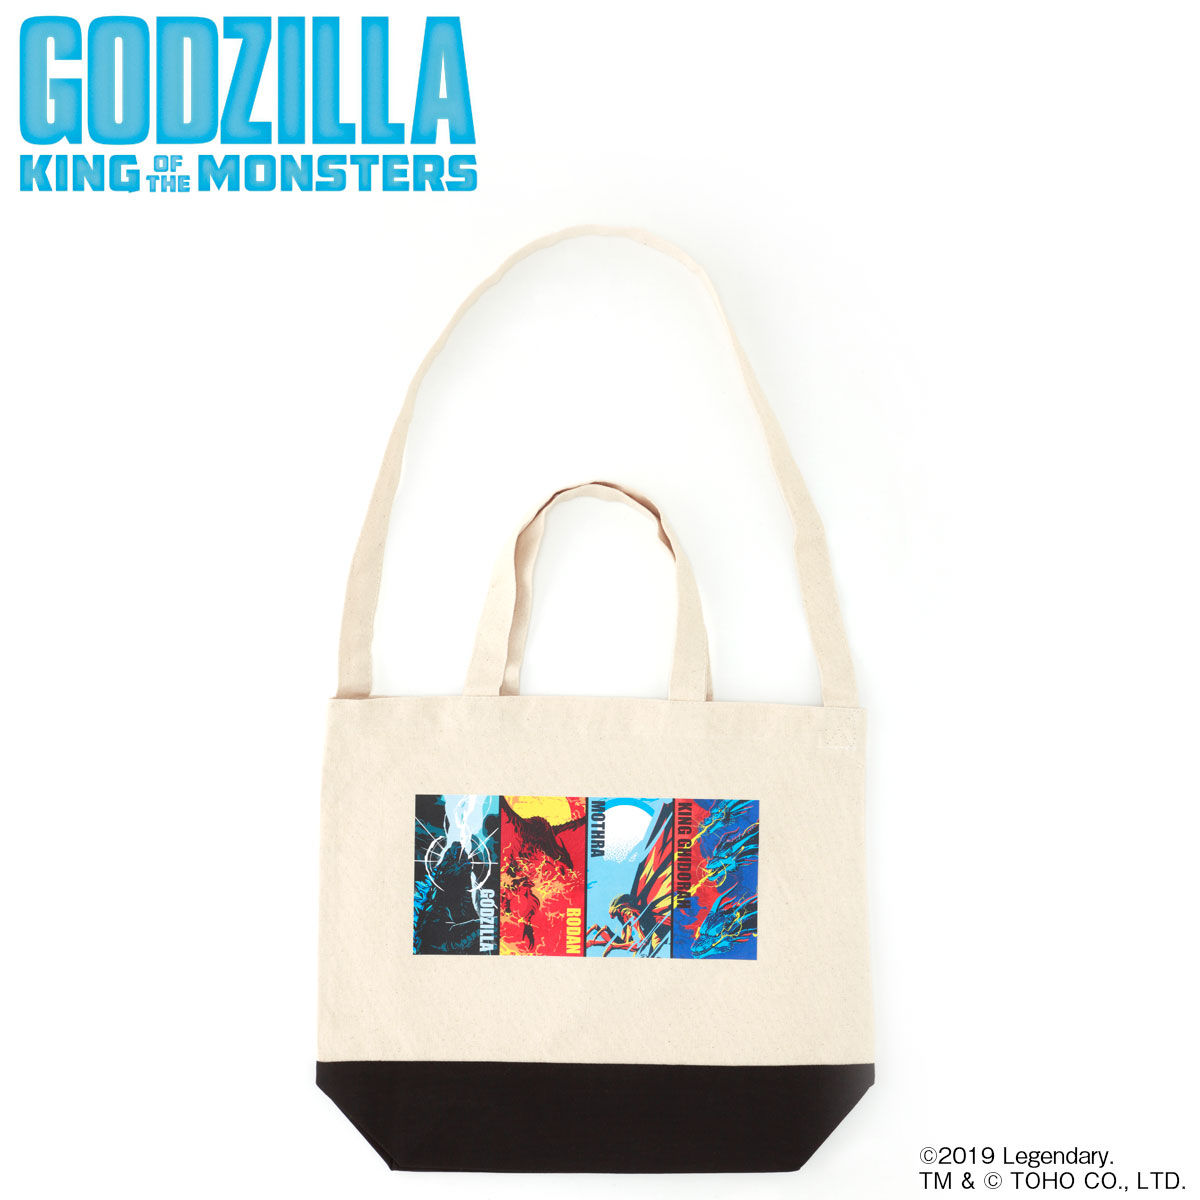 Godzilla: King of the Monsters Tote Bag